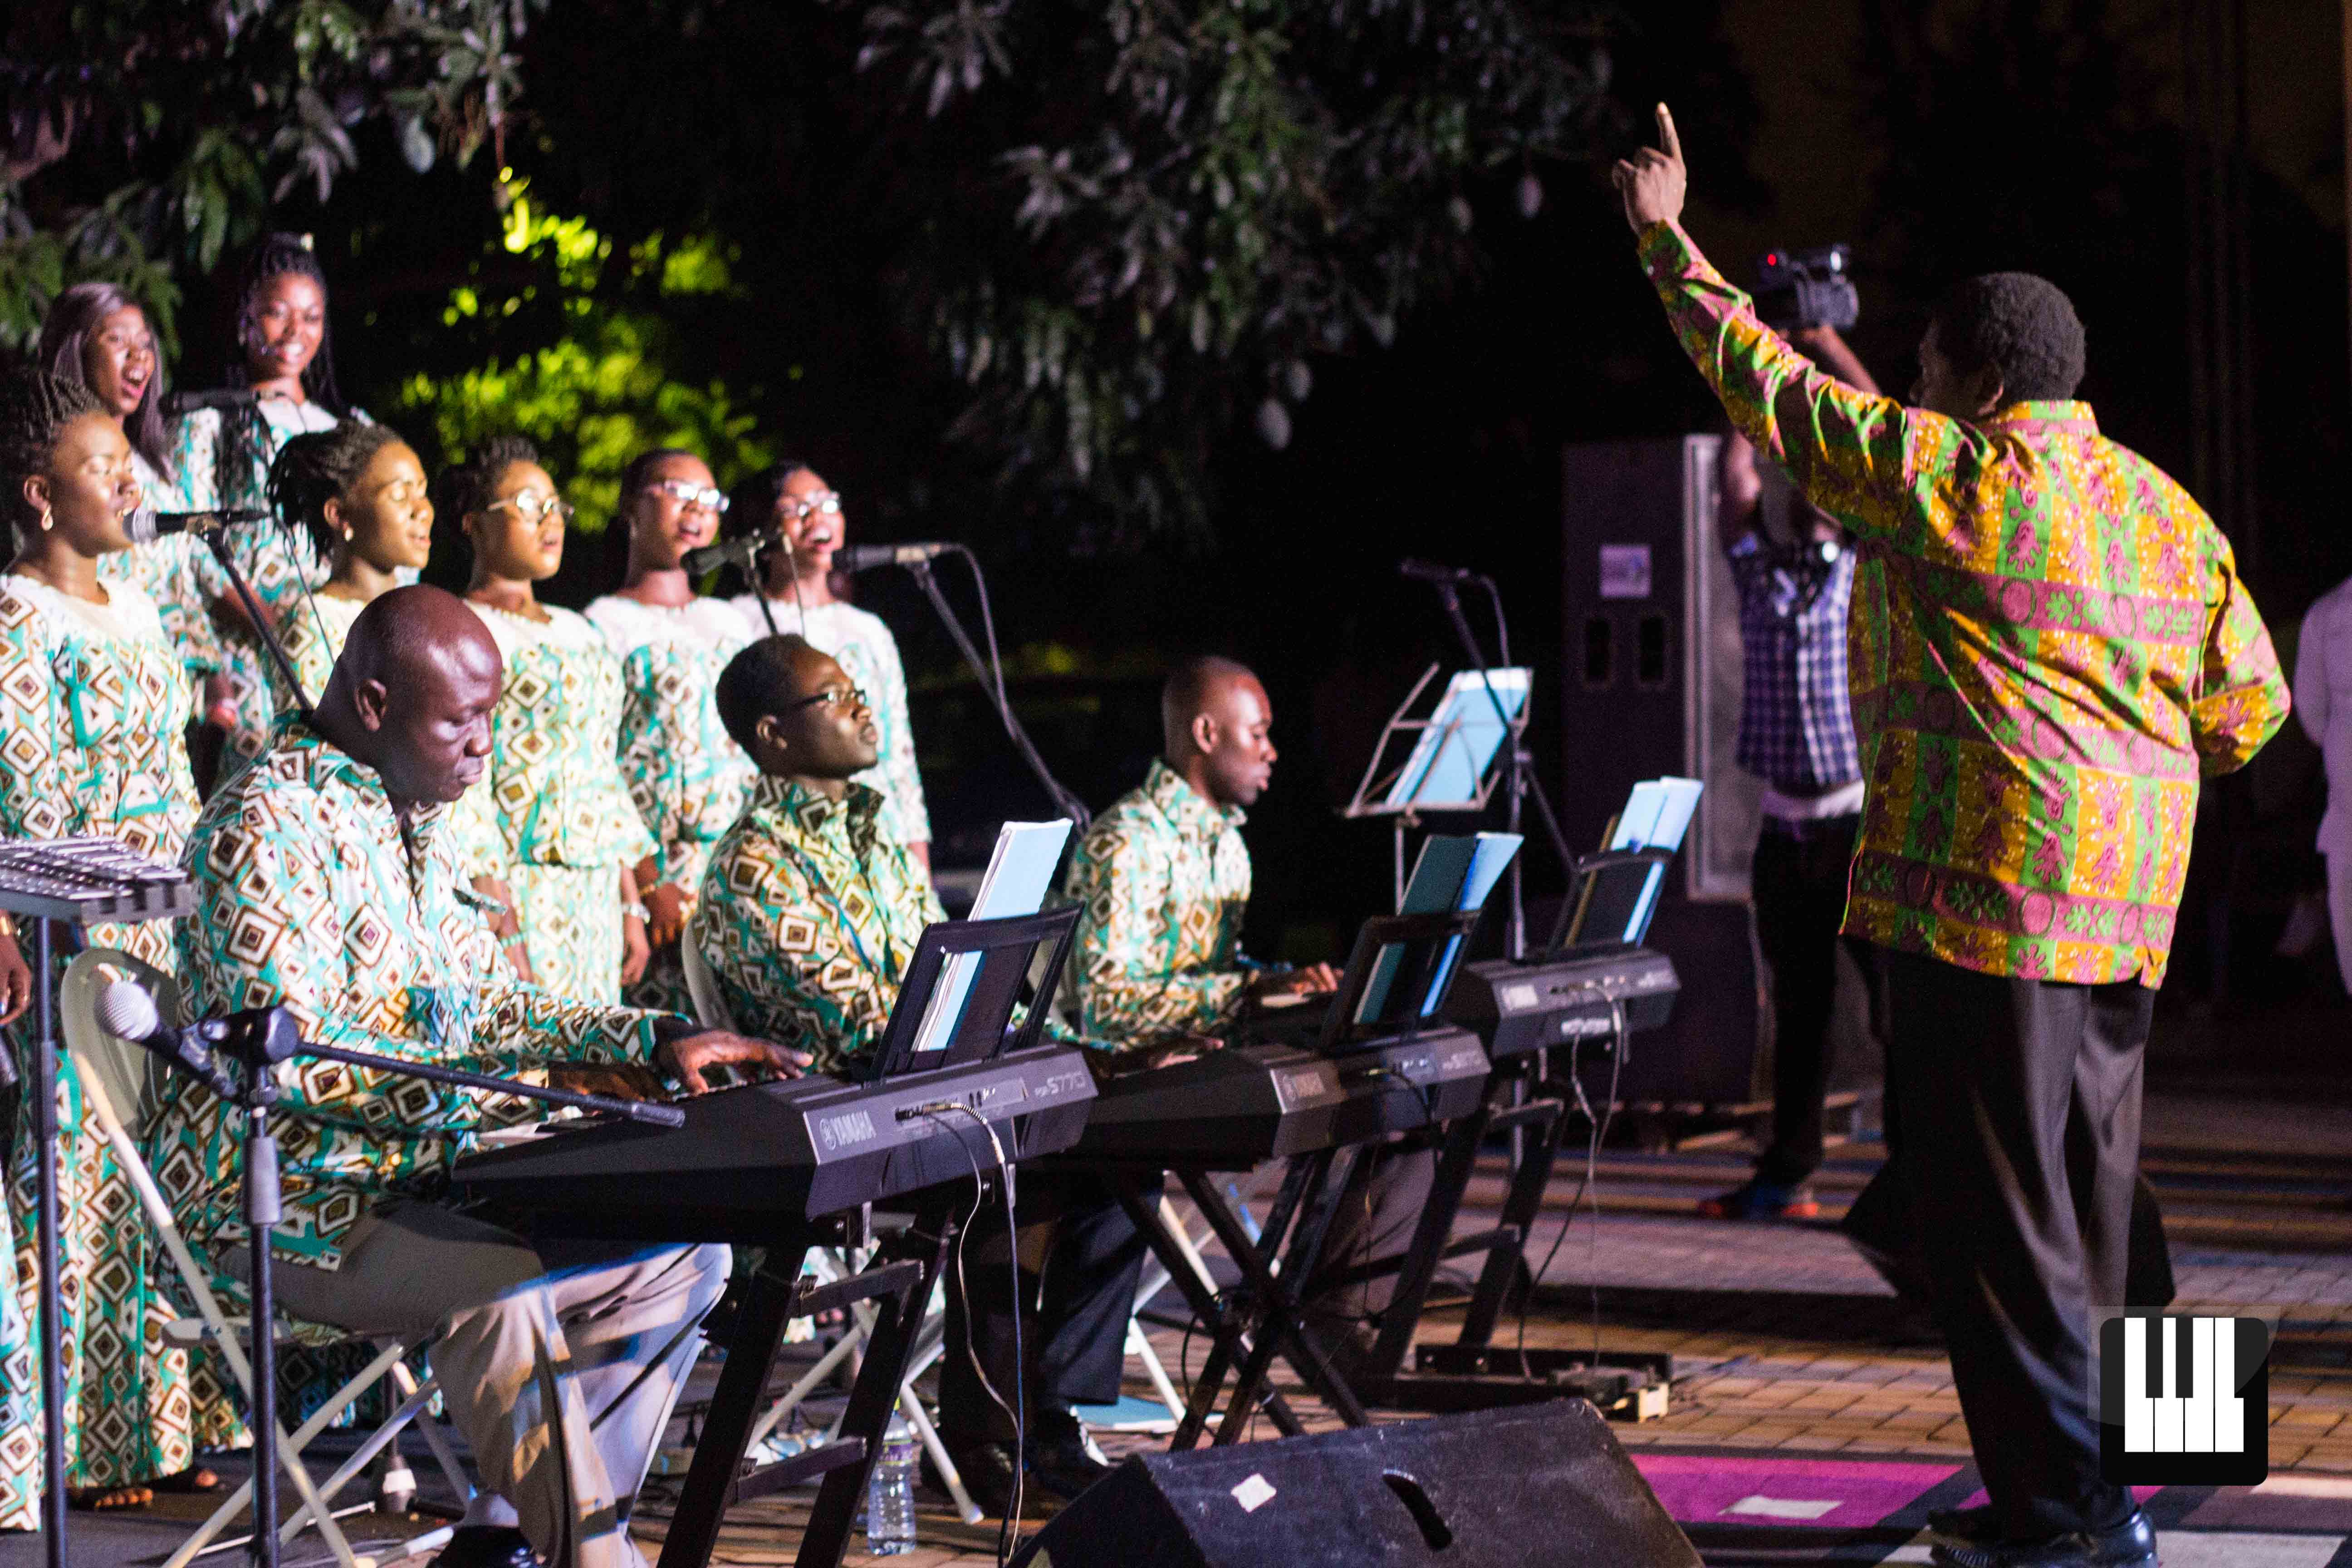 2017 Year in Review Choral Music Ghana's Jesse Johnson takes us through some of the best musical moments of the last year.